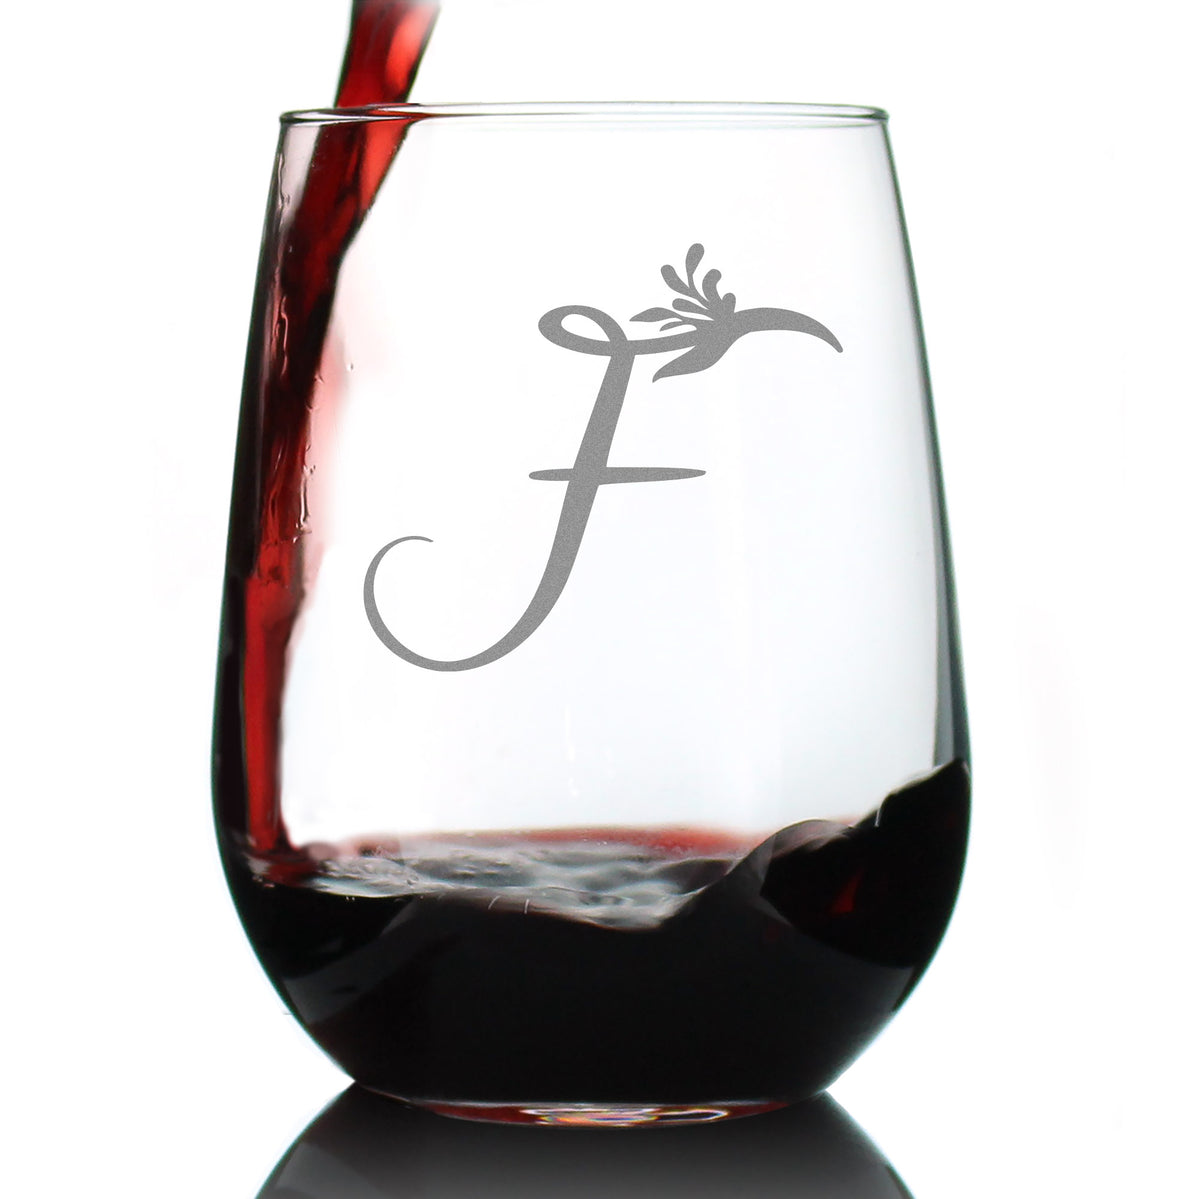 Monogram Floral Letter F - Stemless Wine Glass - Personalized Gifts for Women and Men - Large Engraved 17 Oz Glasses